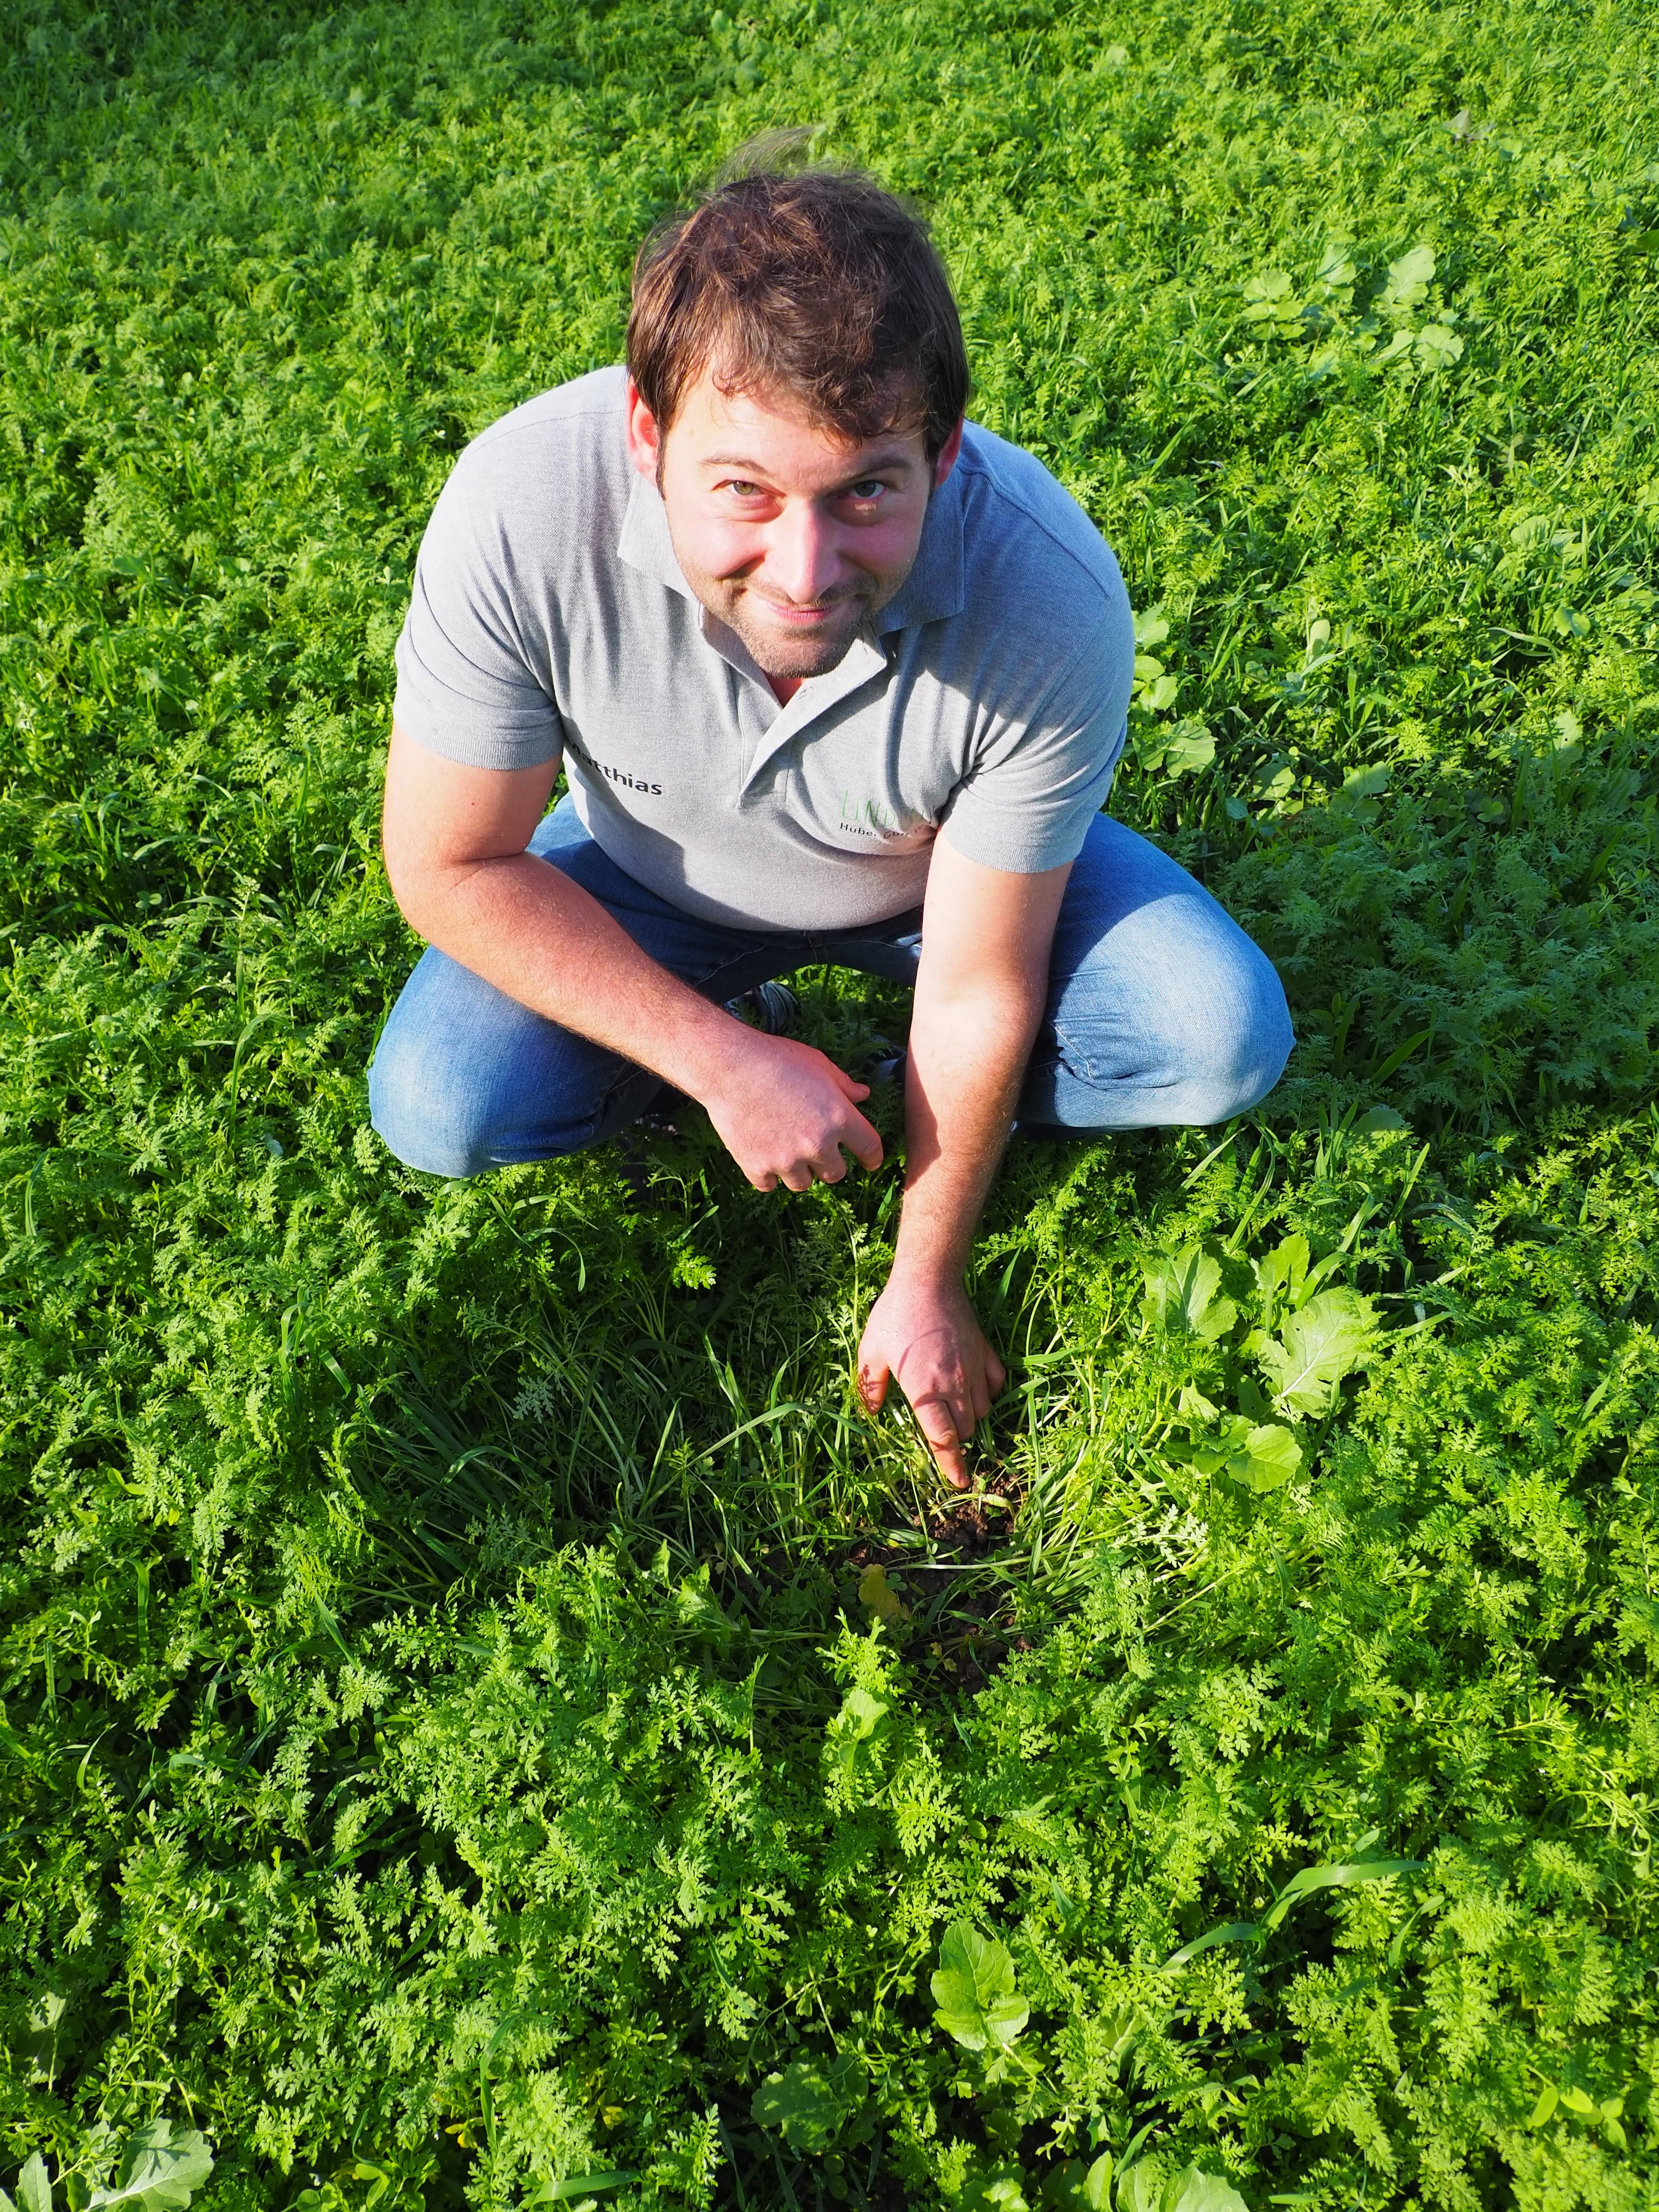 Farmer kneeling on the field with many green plants.